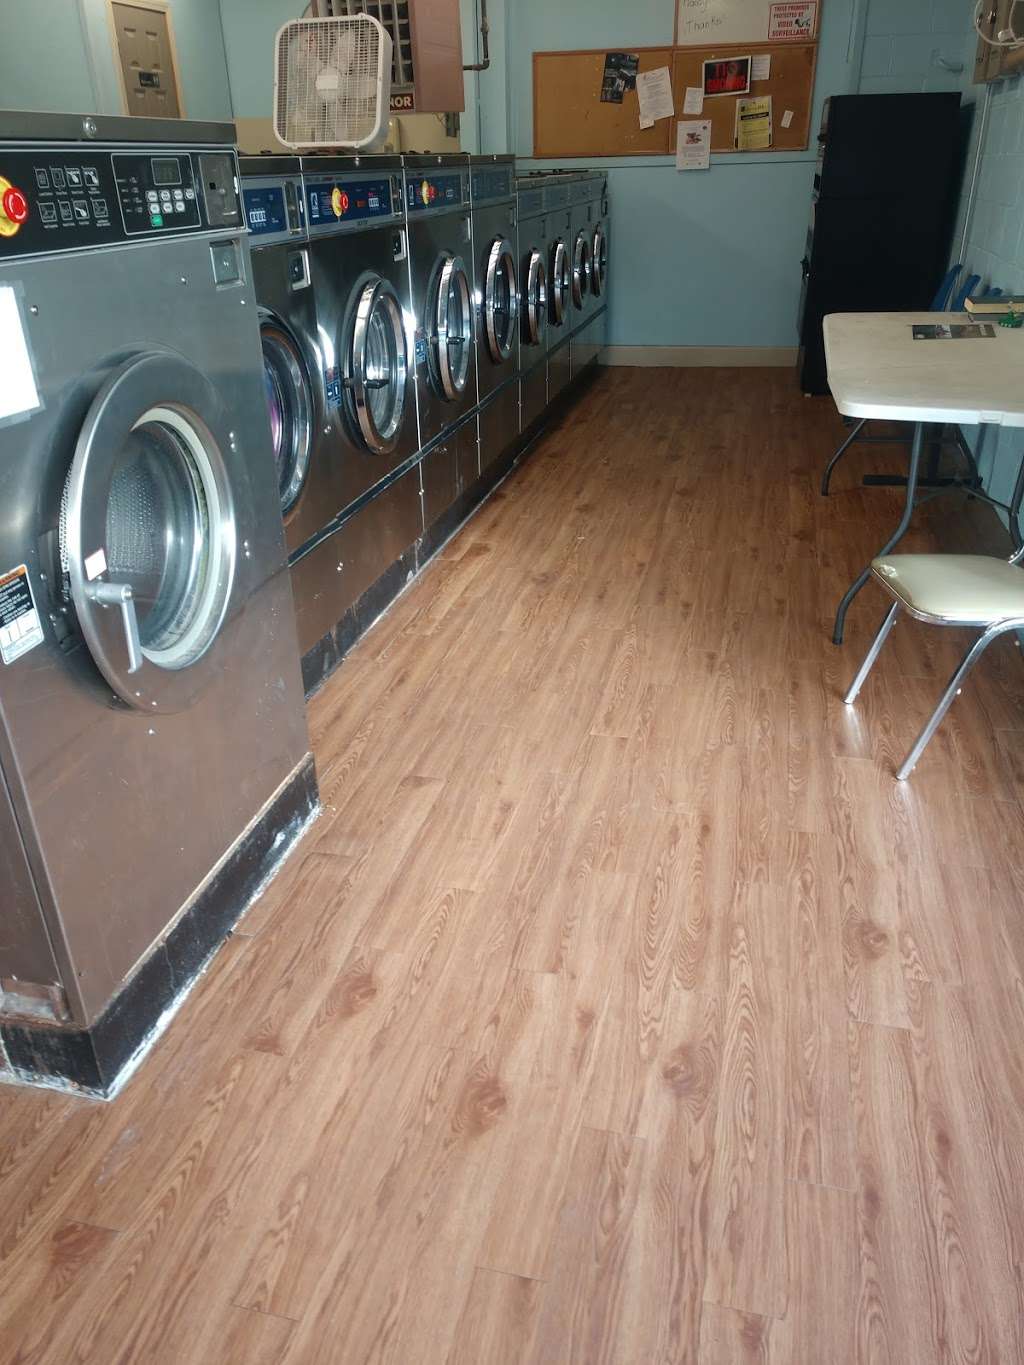 Spring Hill 24hr Coin Laundry | 110 S Webster St, Spring Hill, KS 66083, USA | Phone: (913) 912-3756